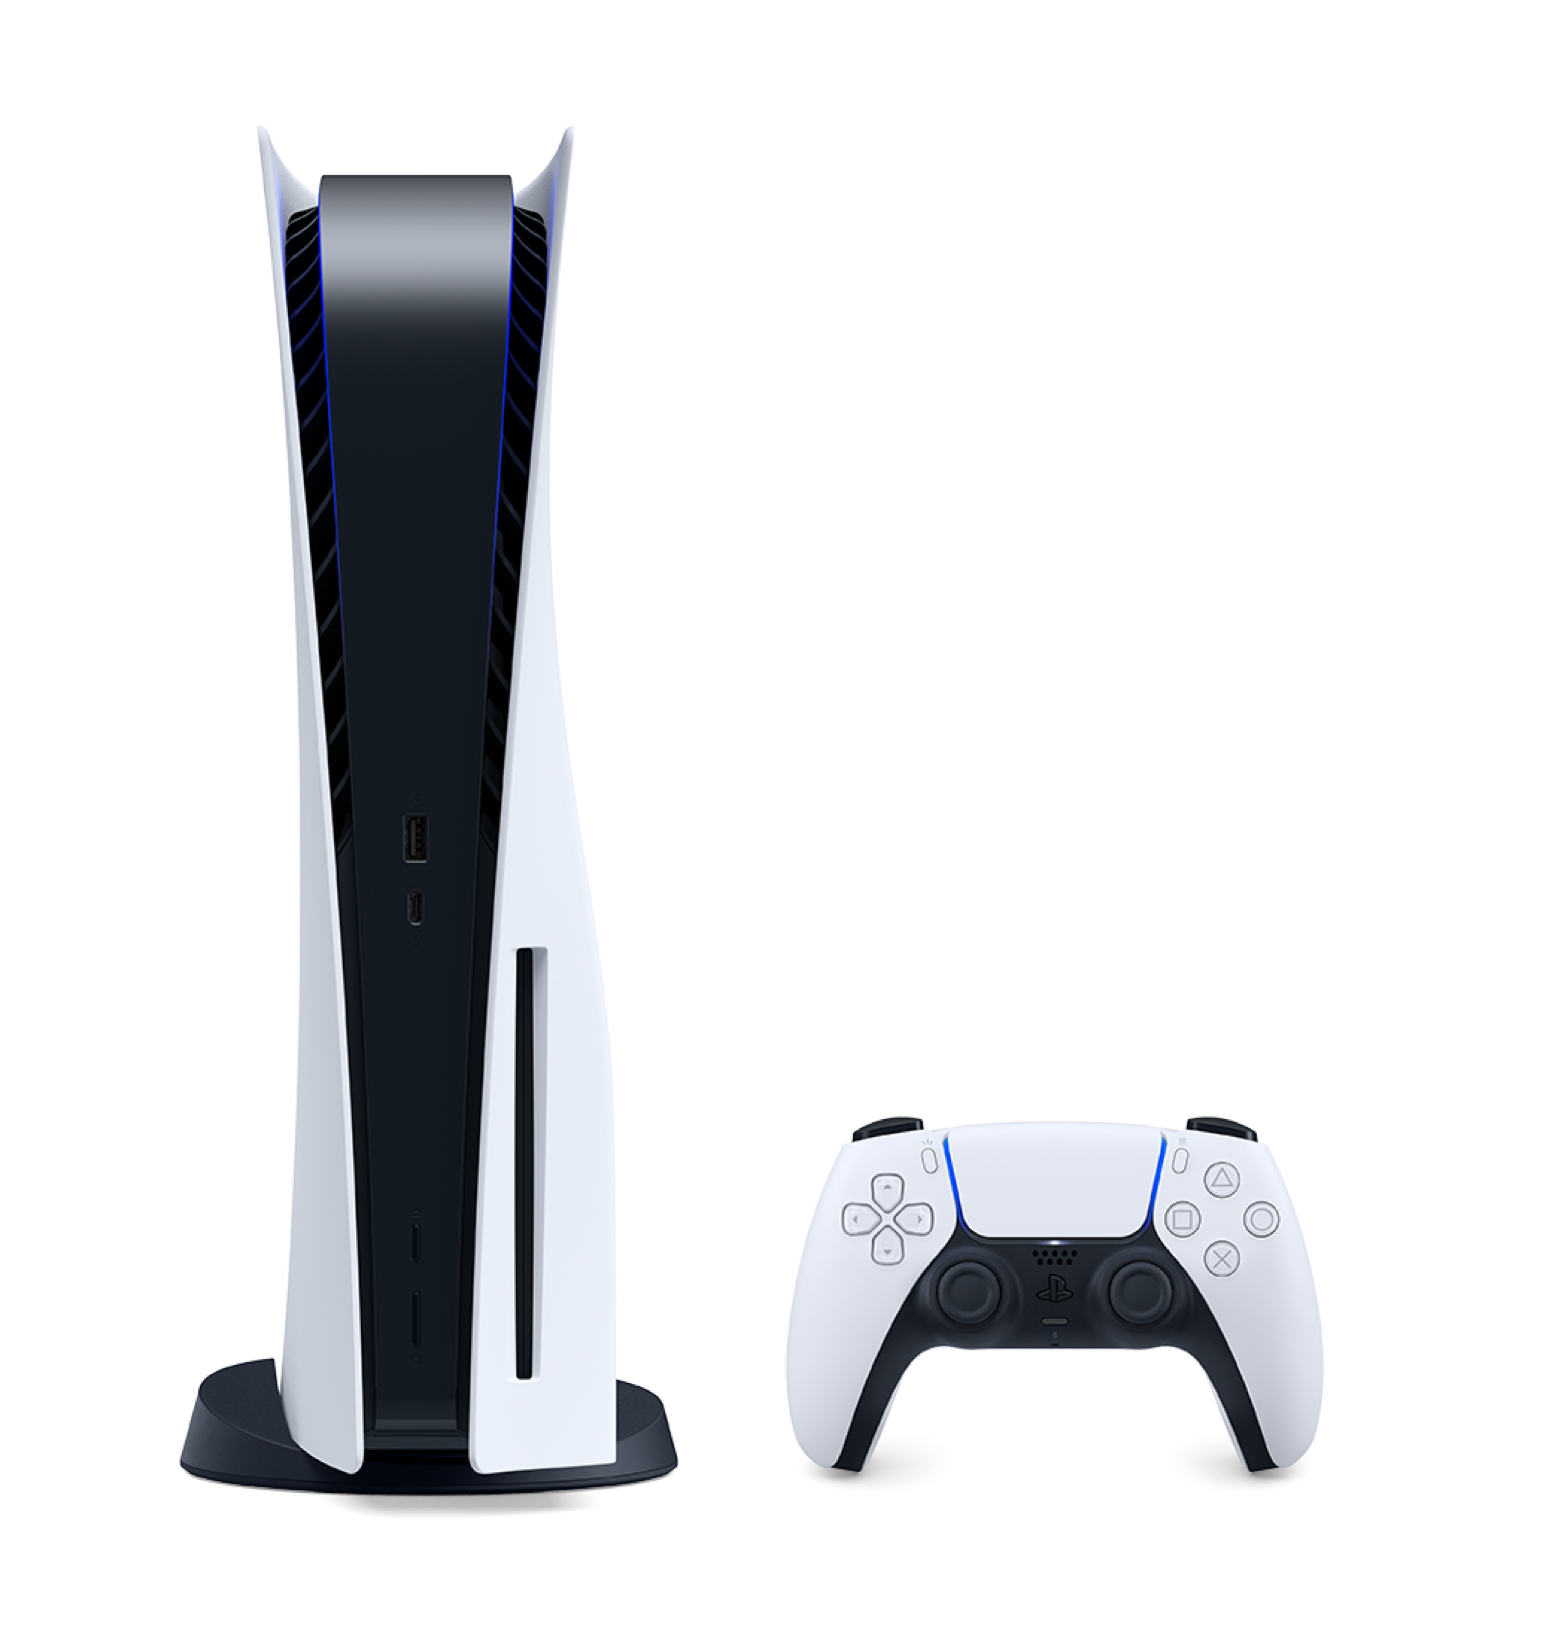 Playstation 5 with dualsense controller